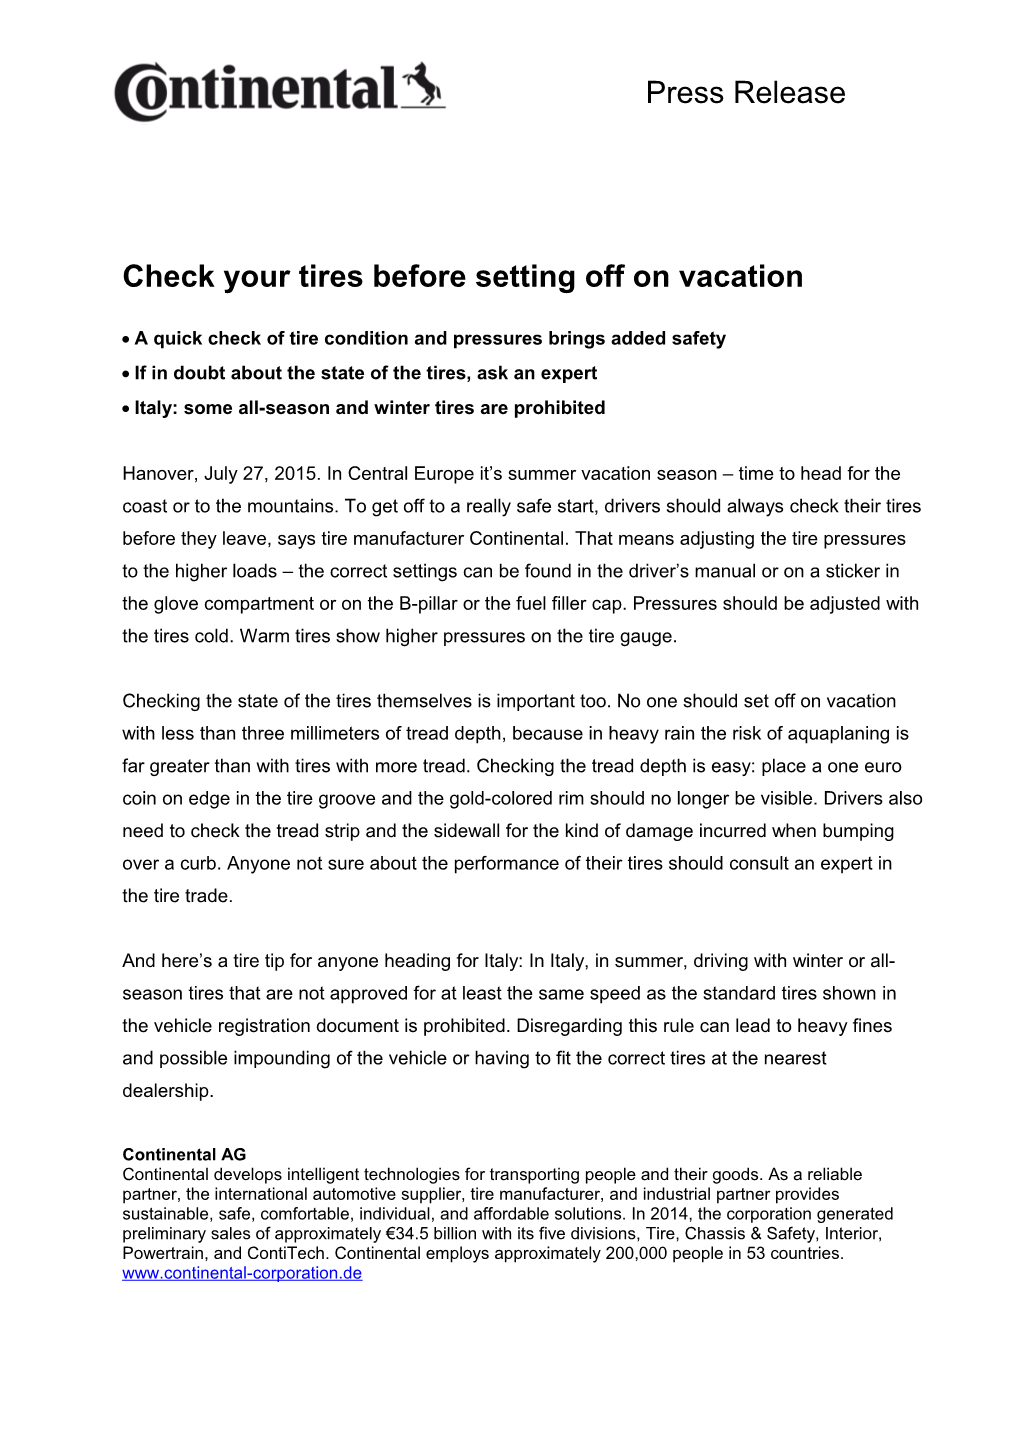 Check Your Tires Before Setting Off on Vacation